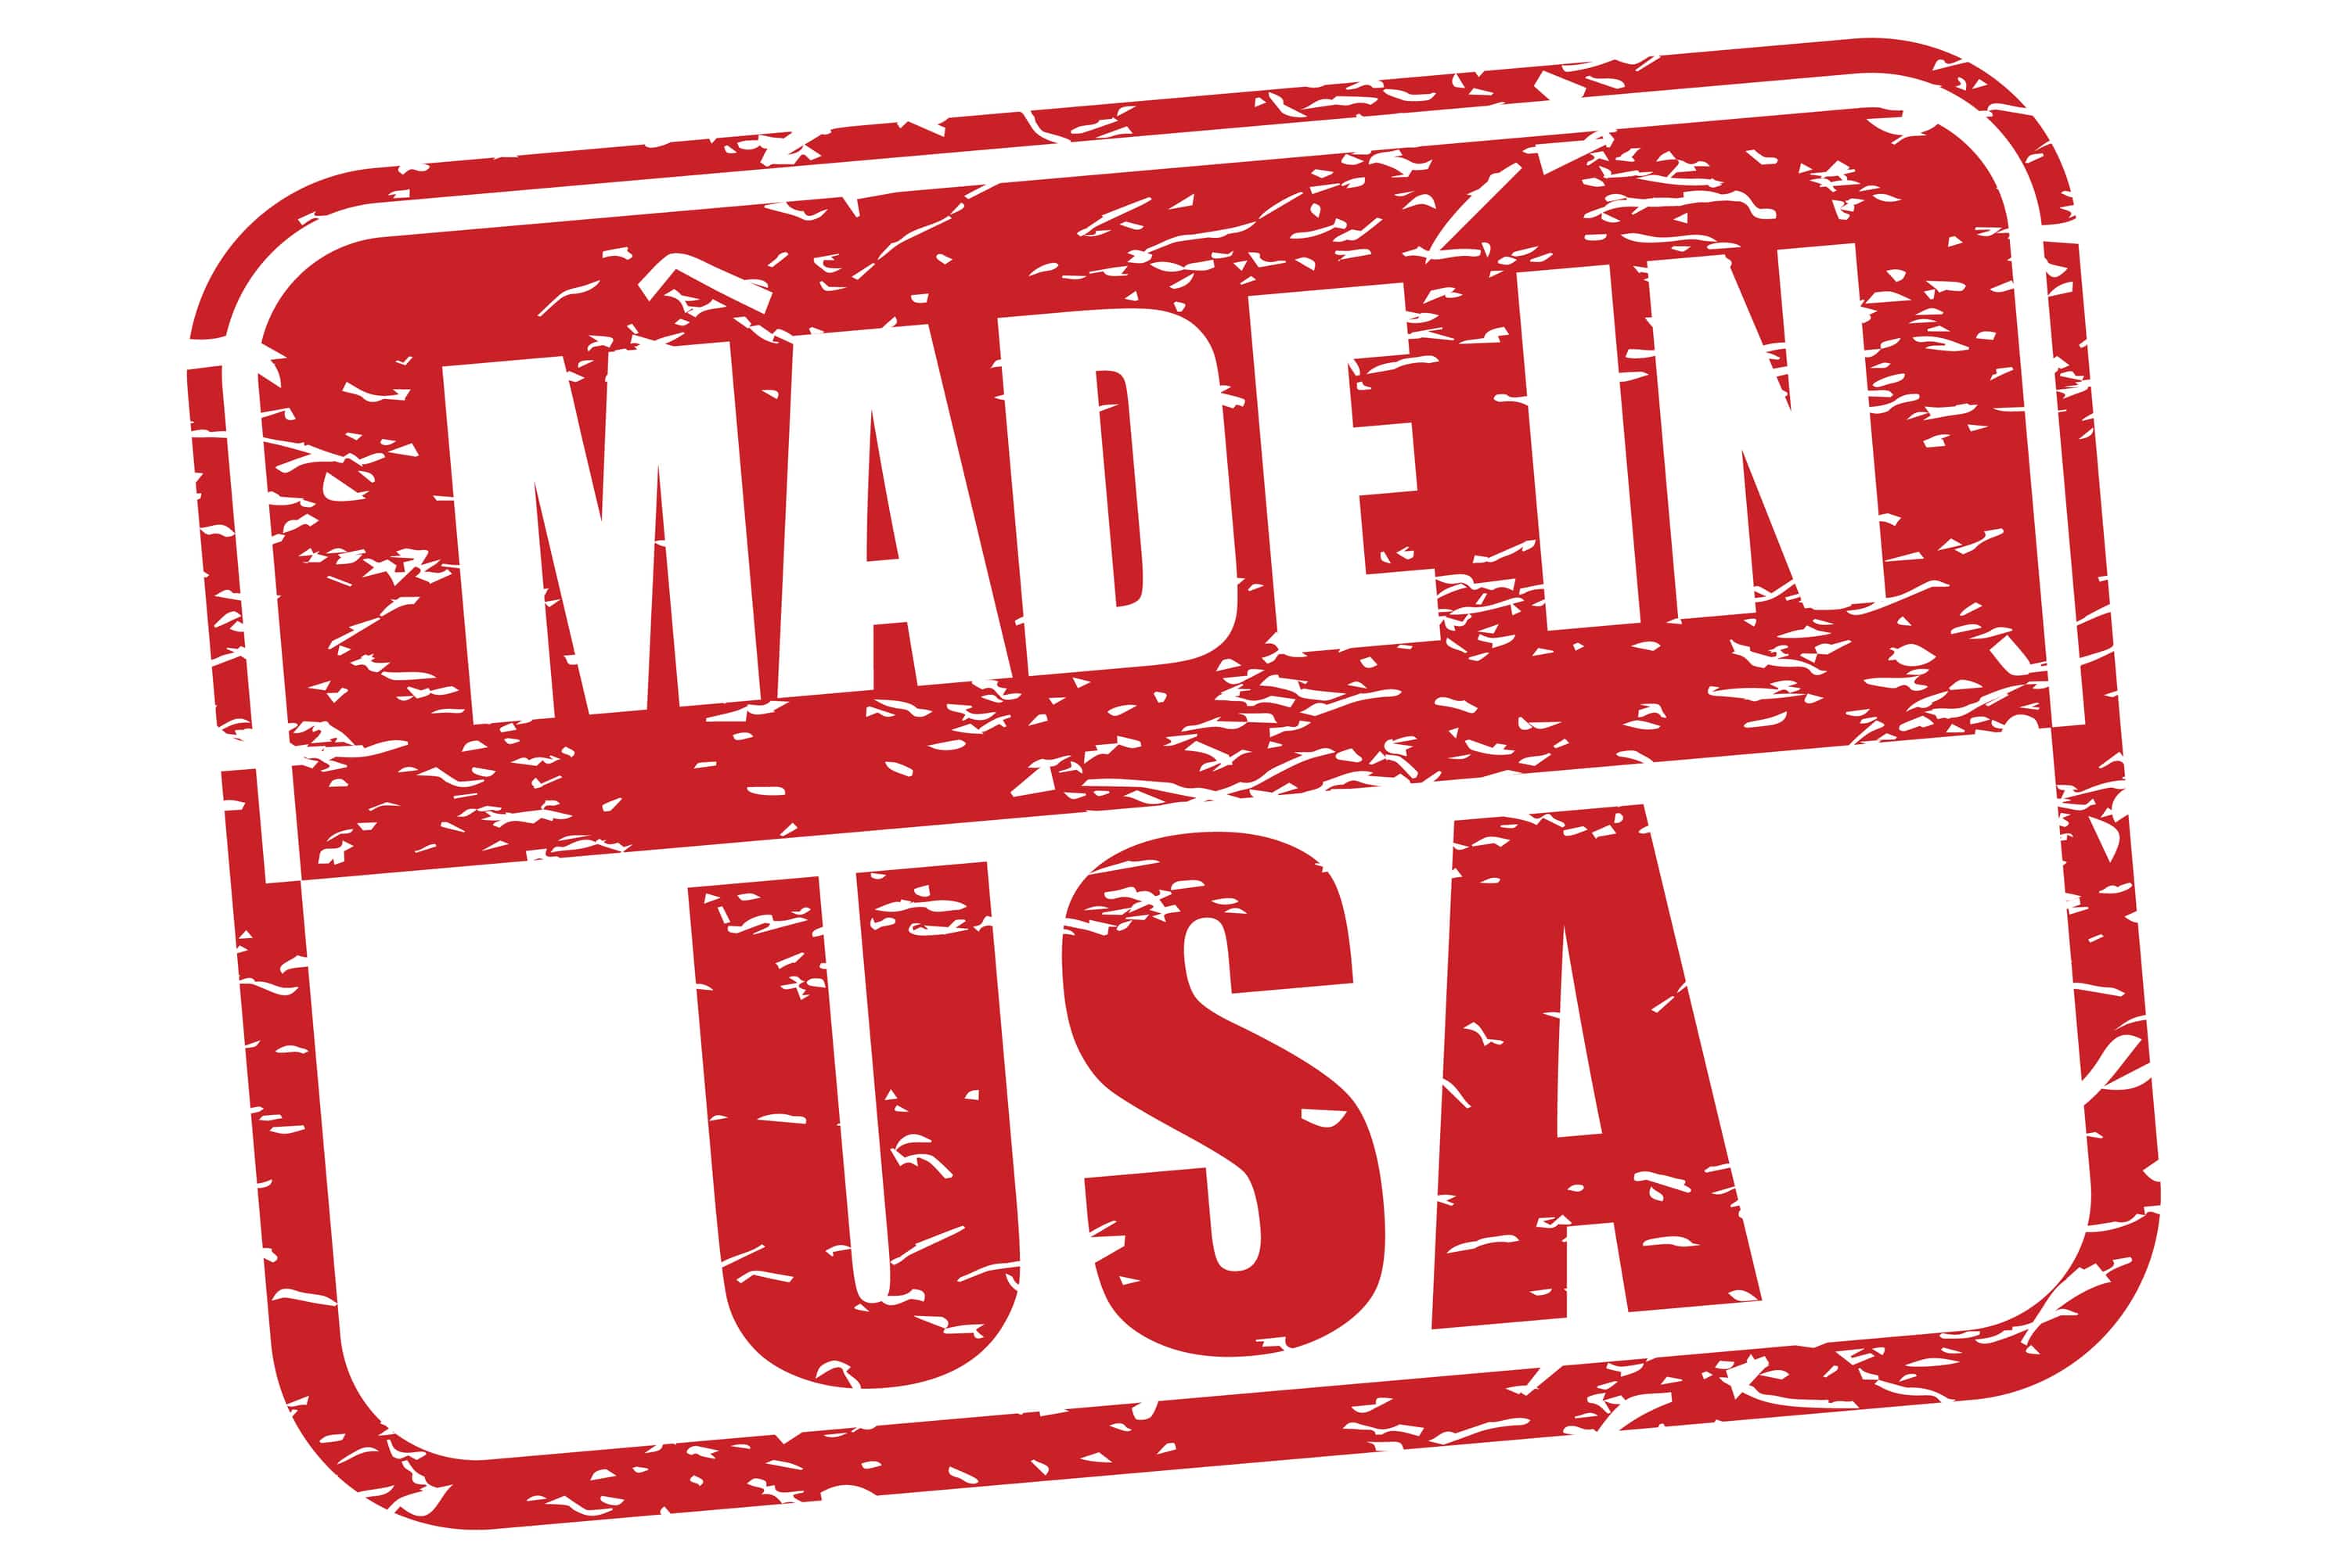 A Guide to Finding American Made Products